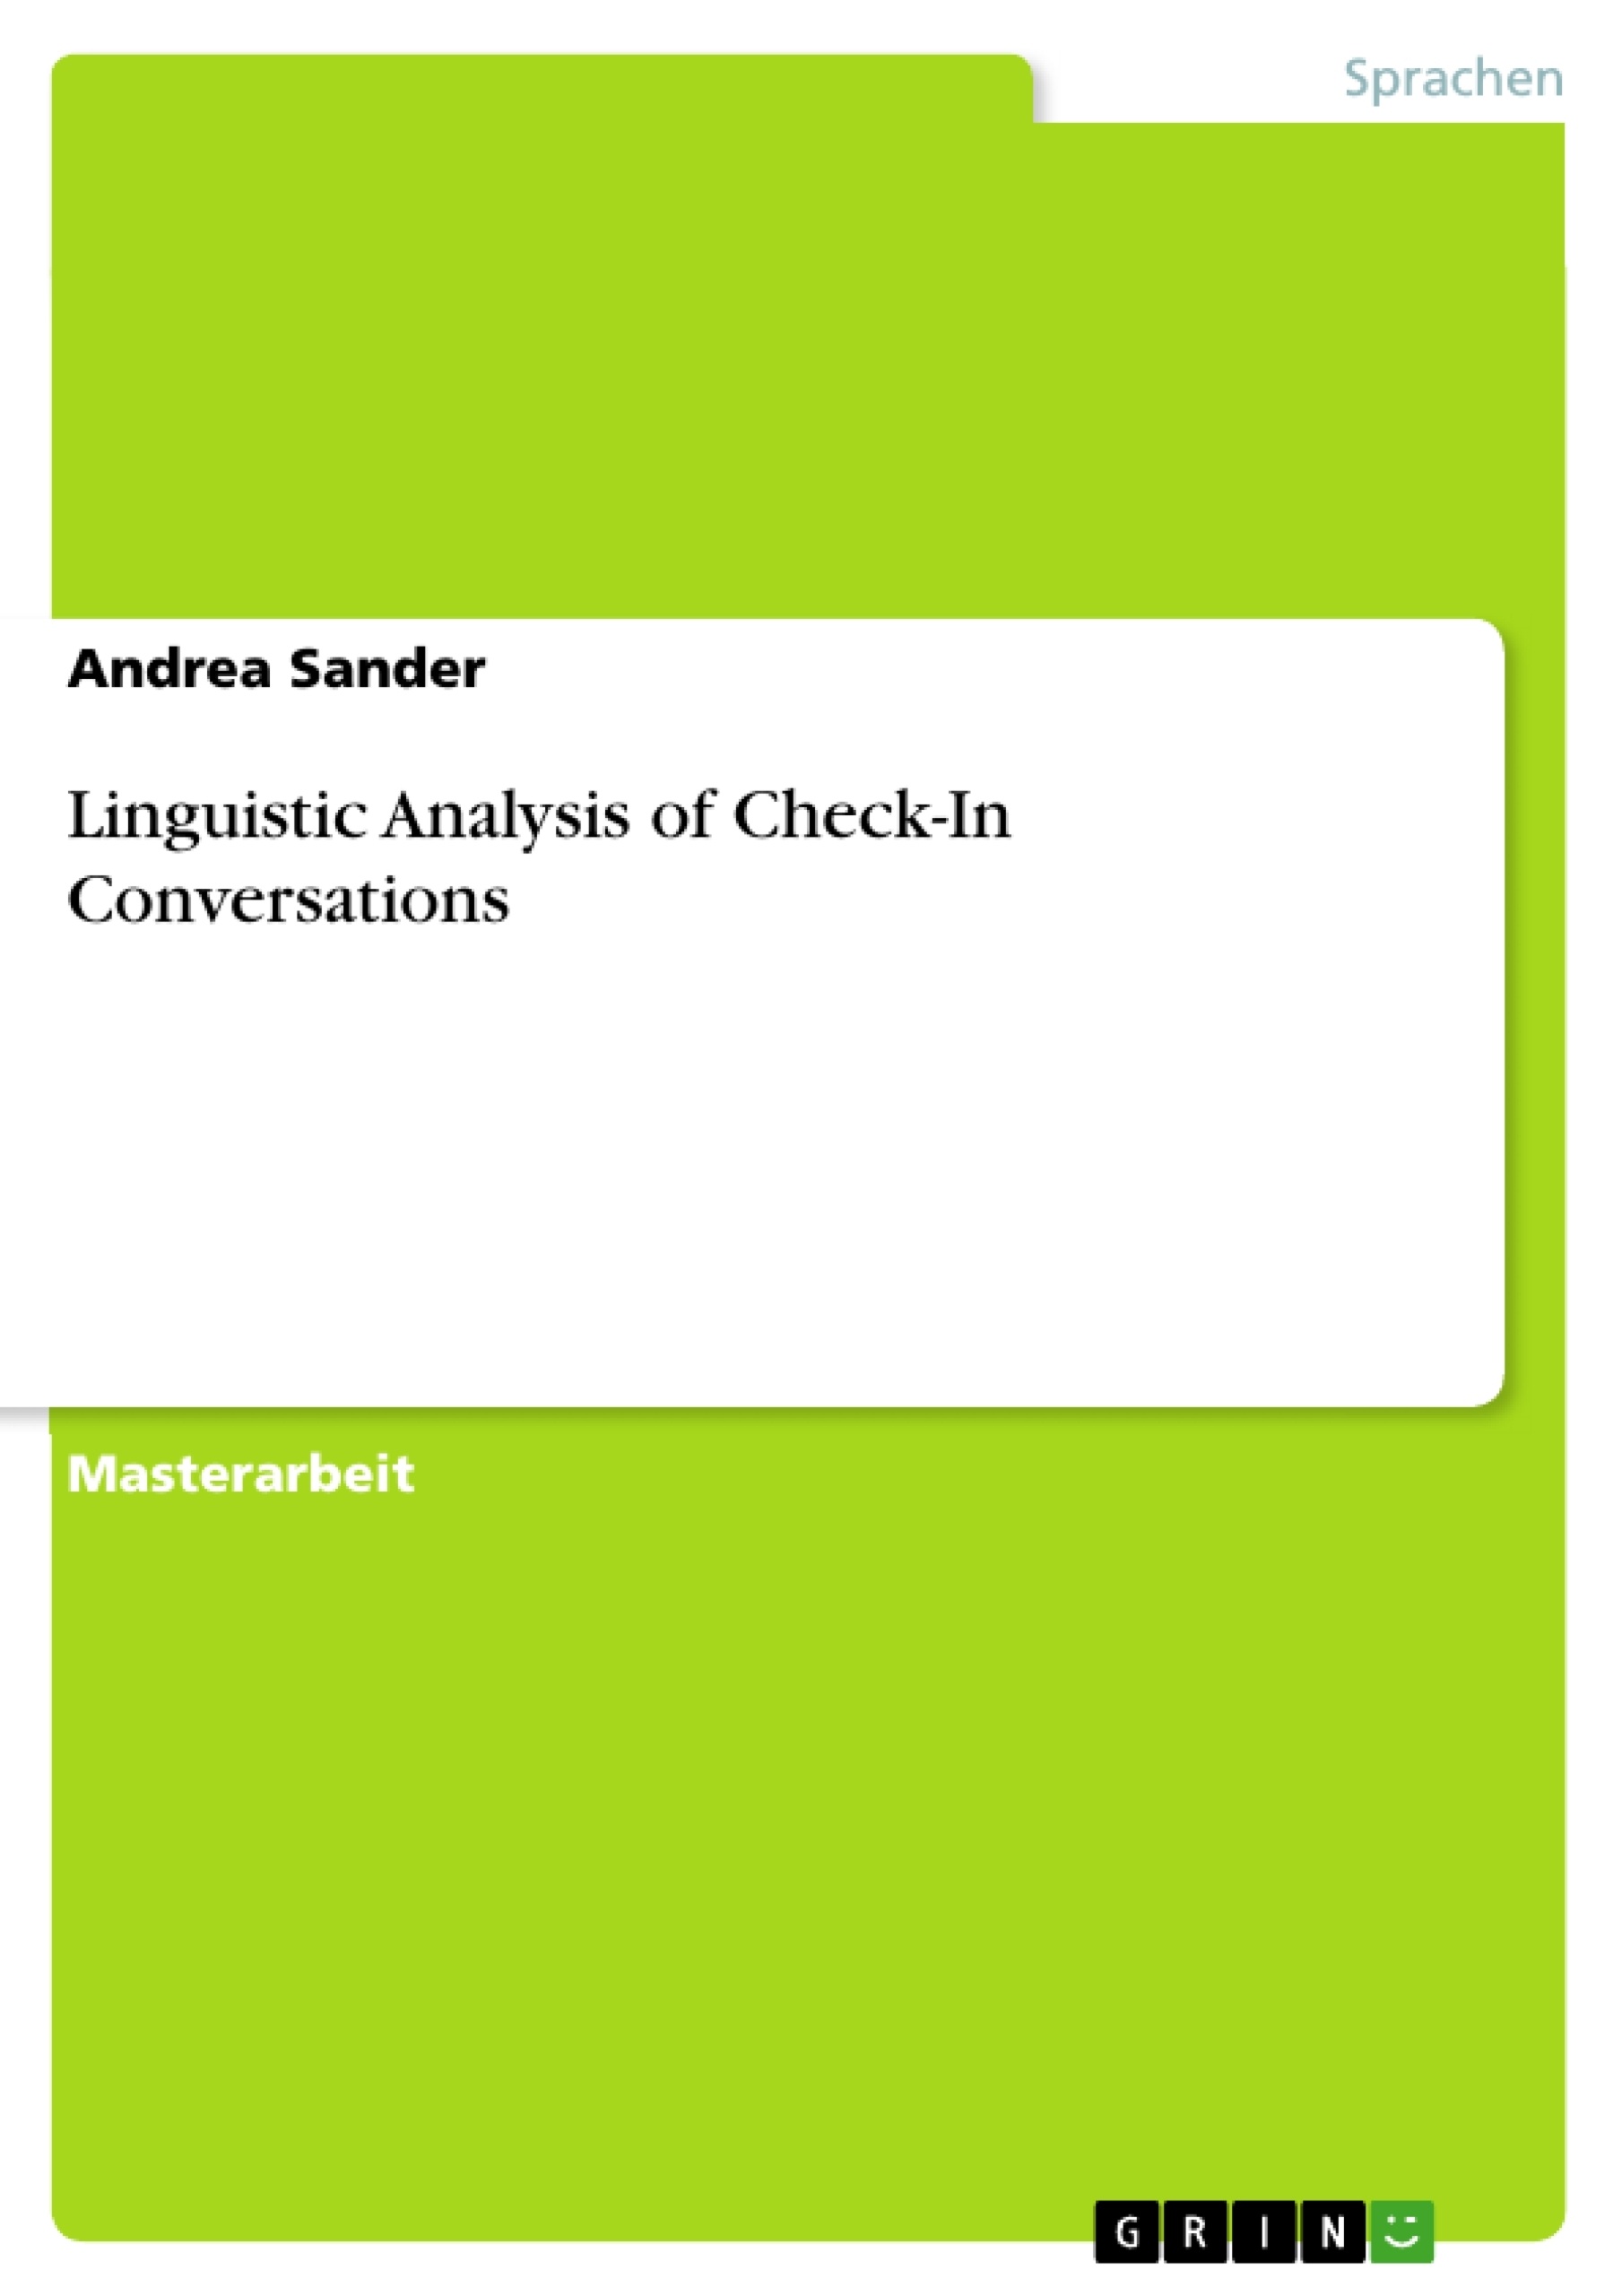 Título: Linguistic Analysis of Check-In Conversations